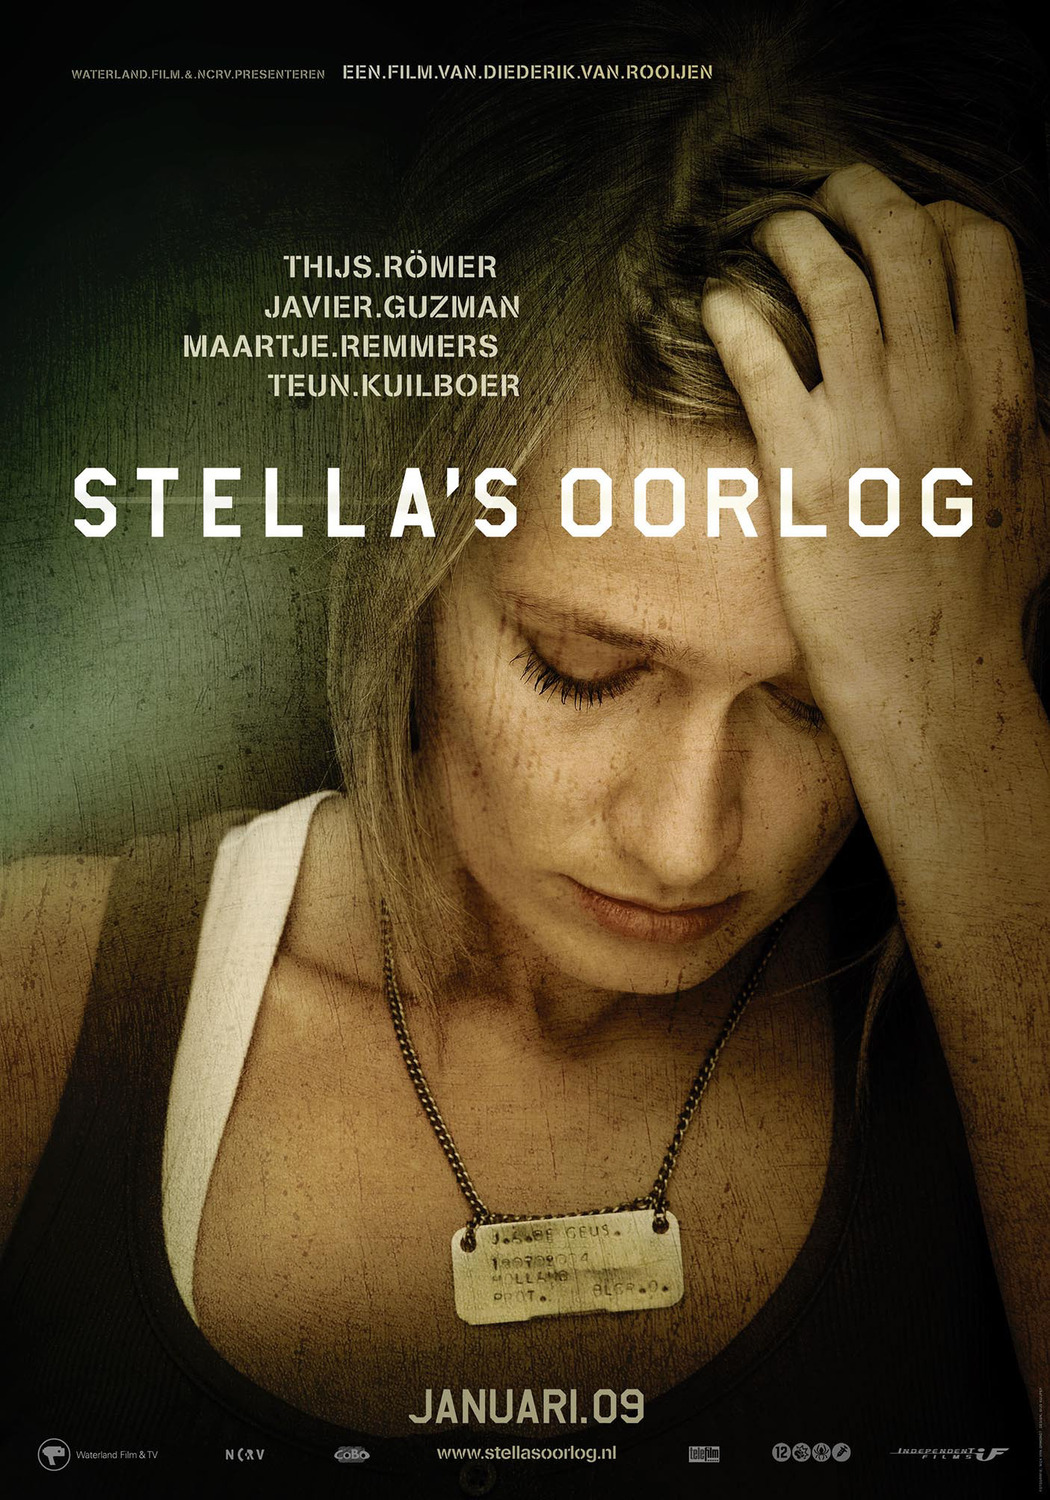 Extra Large Movie Poster Image for Stella's oorlog (#1 of 2)